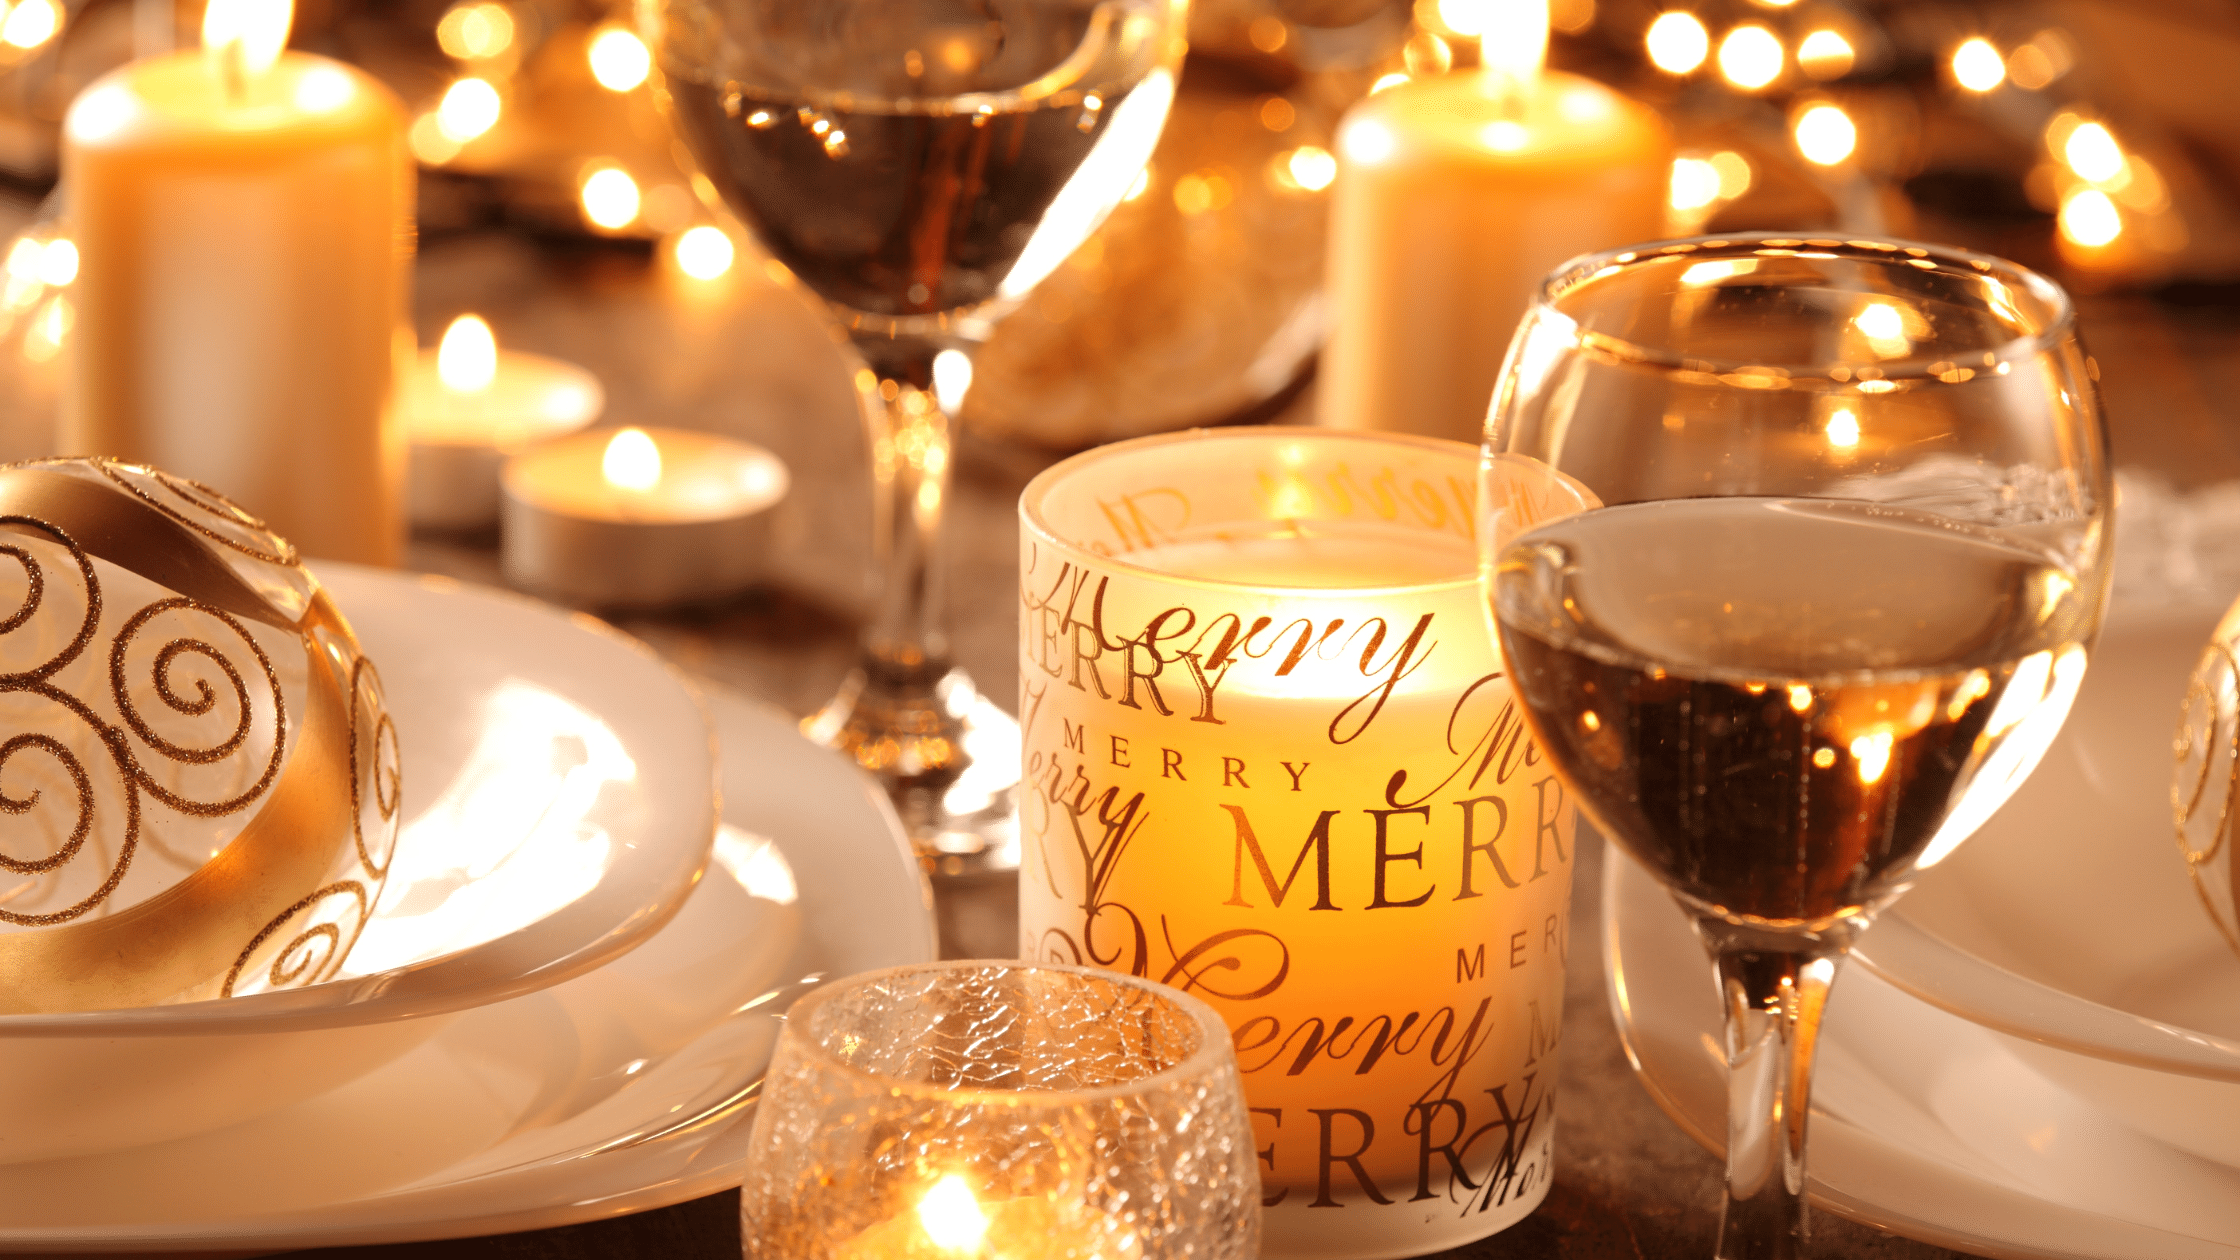 Christmas table set with candles, white wine, and finery.